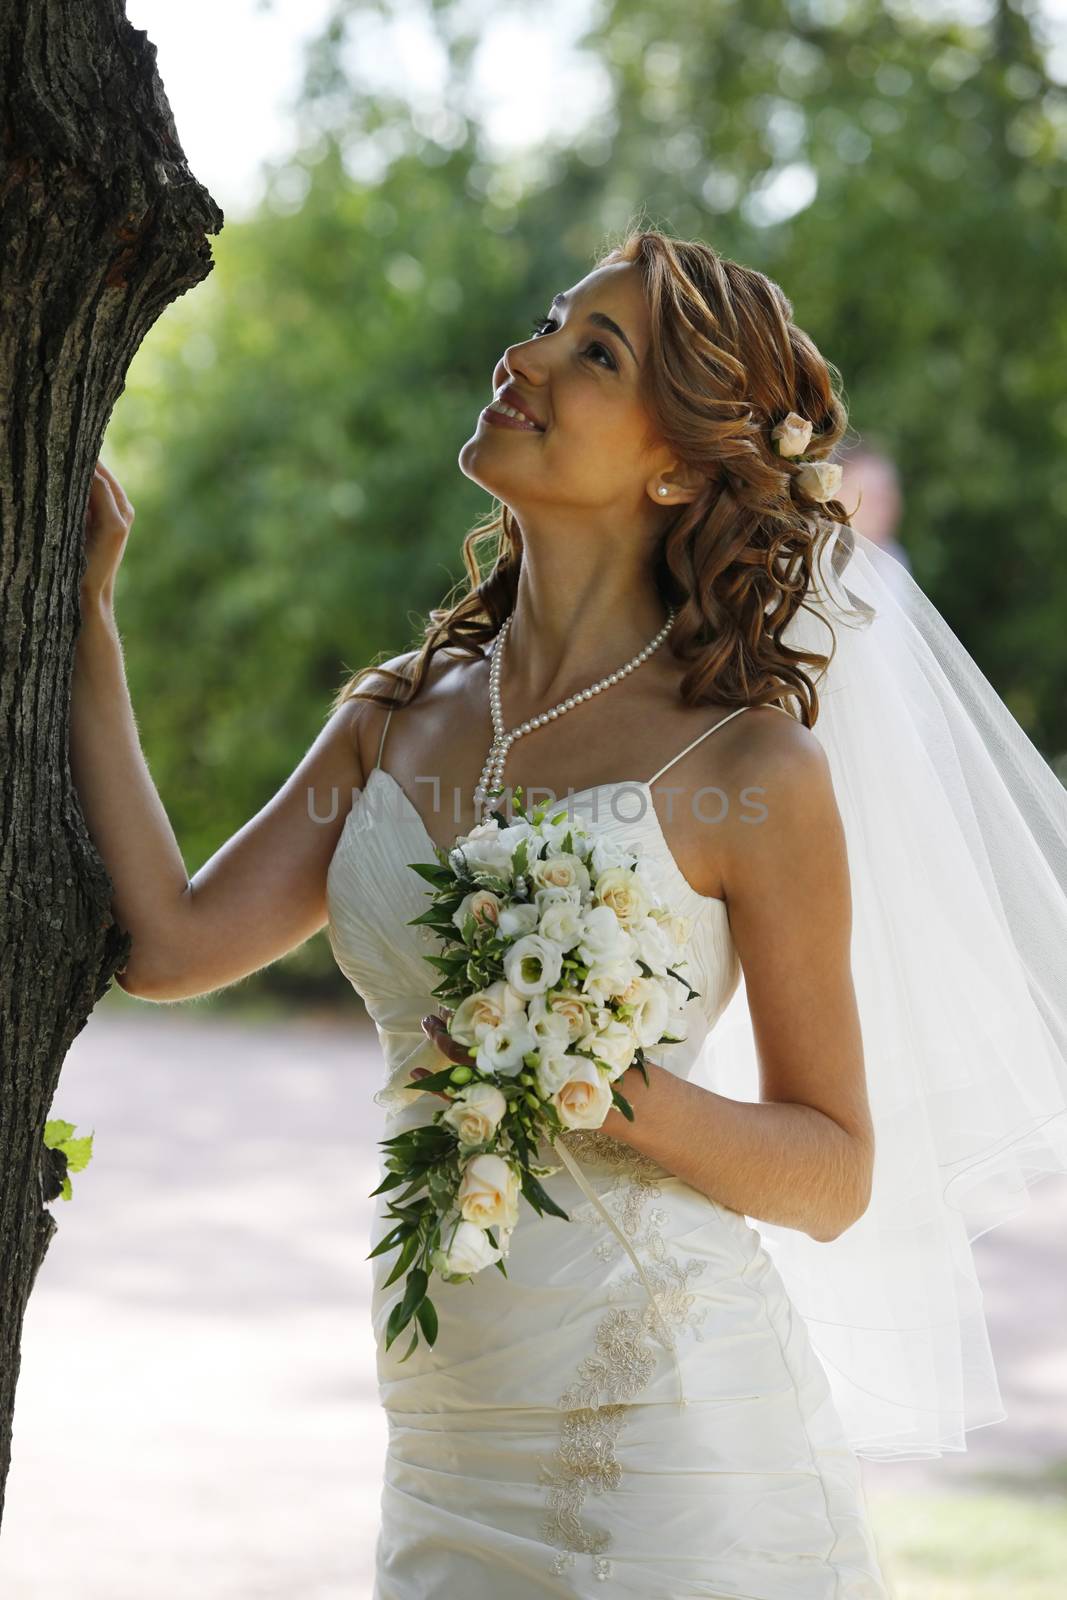 The beautiful bride with bouquet in park